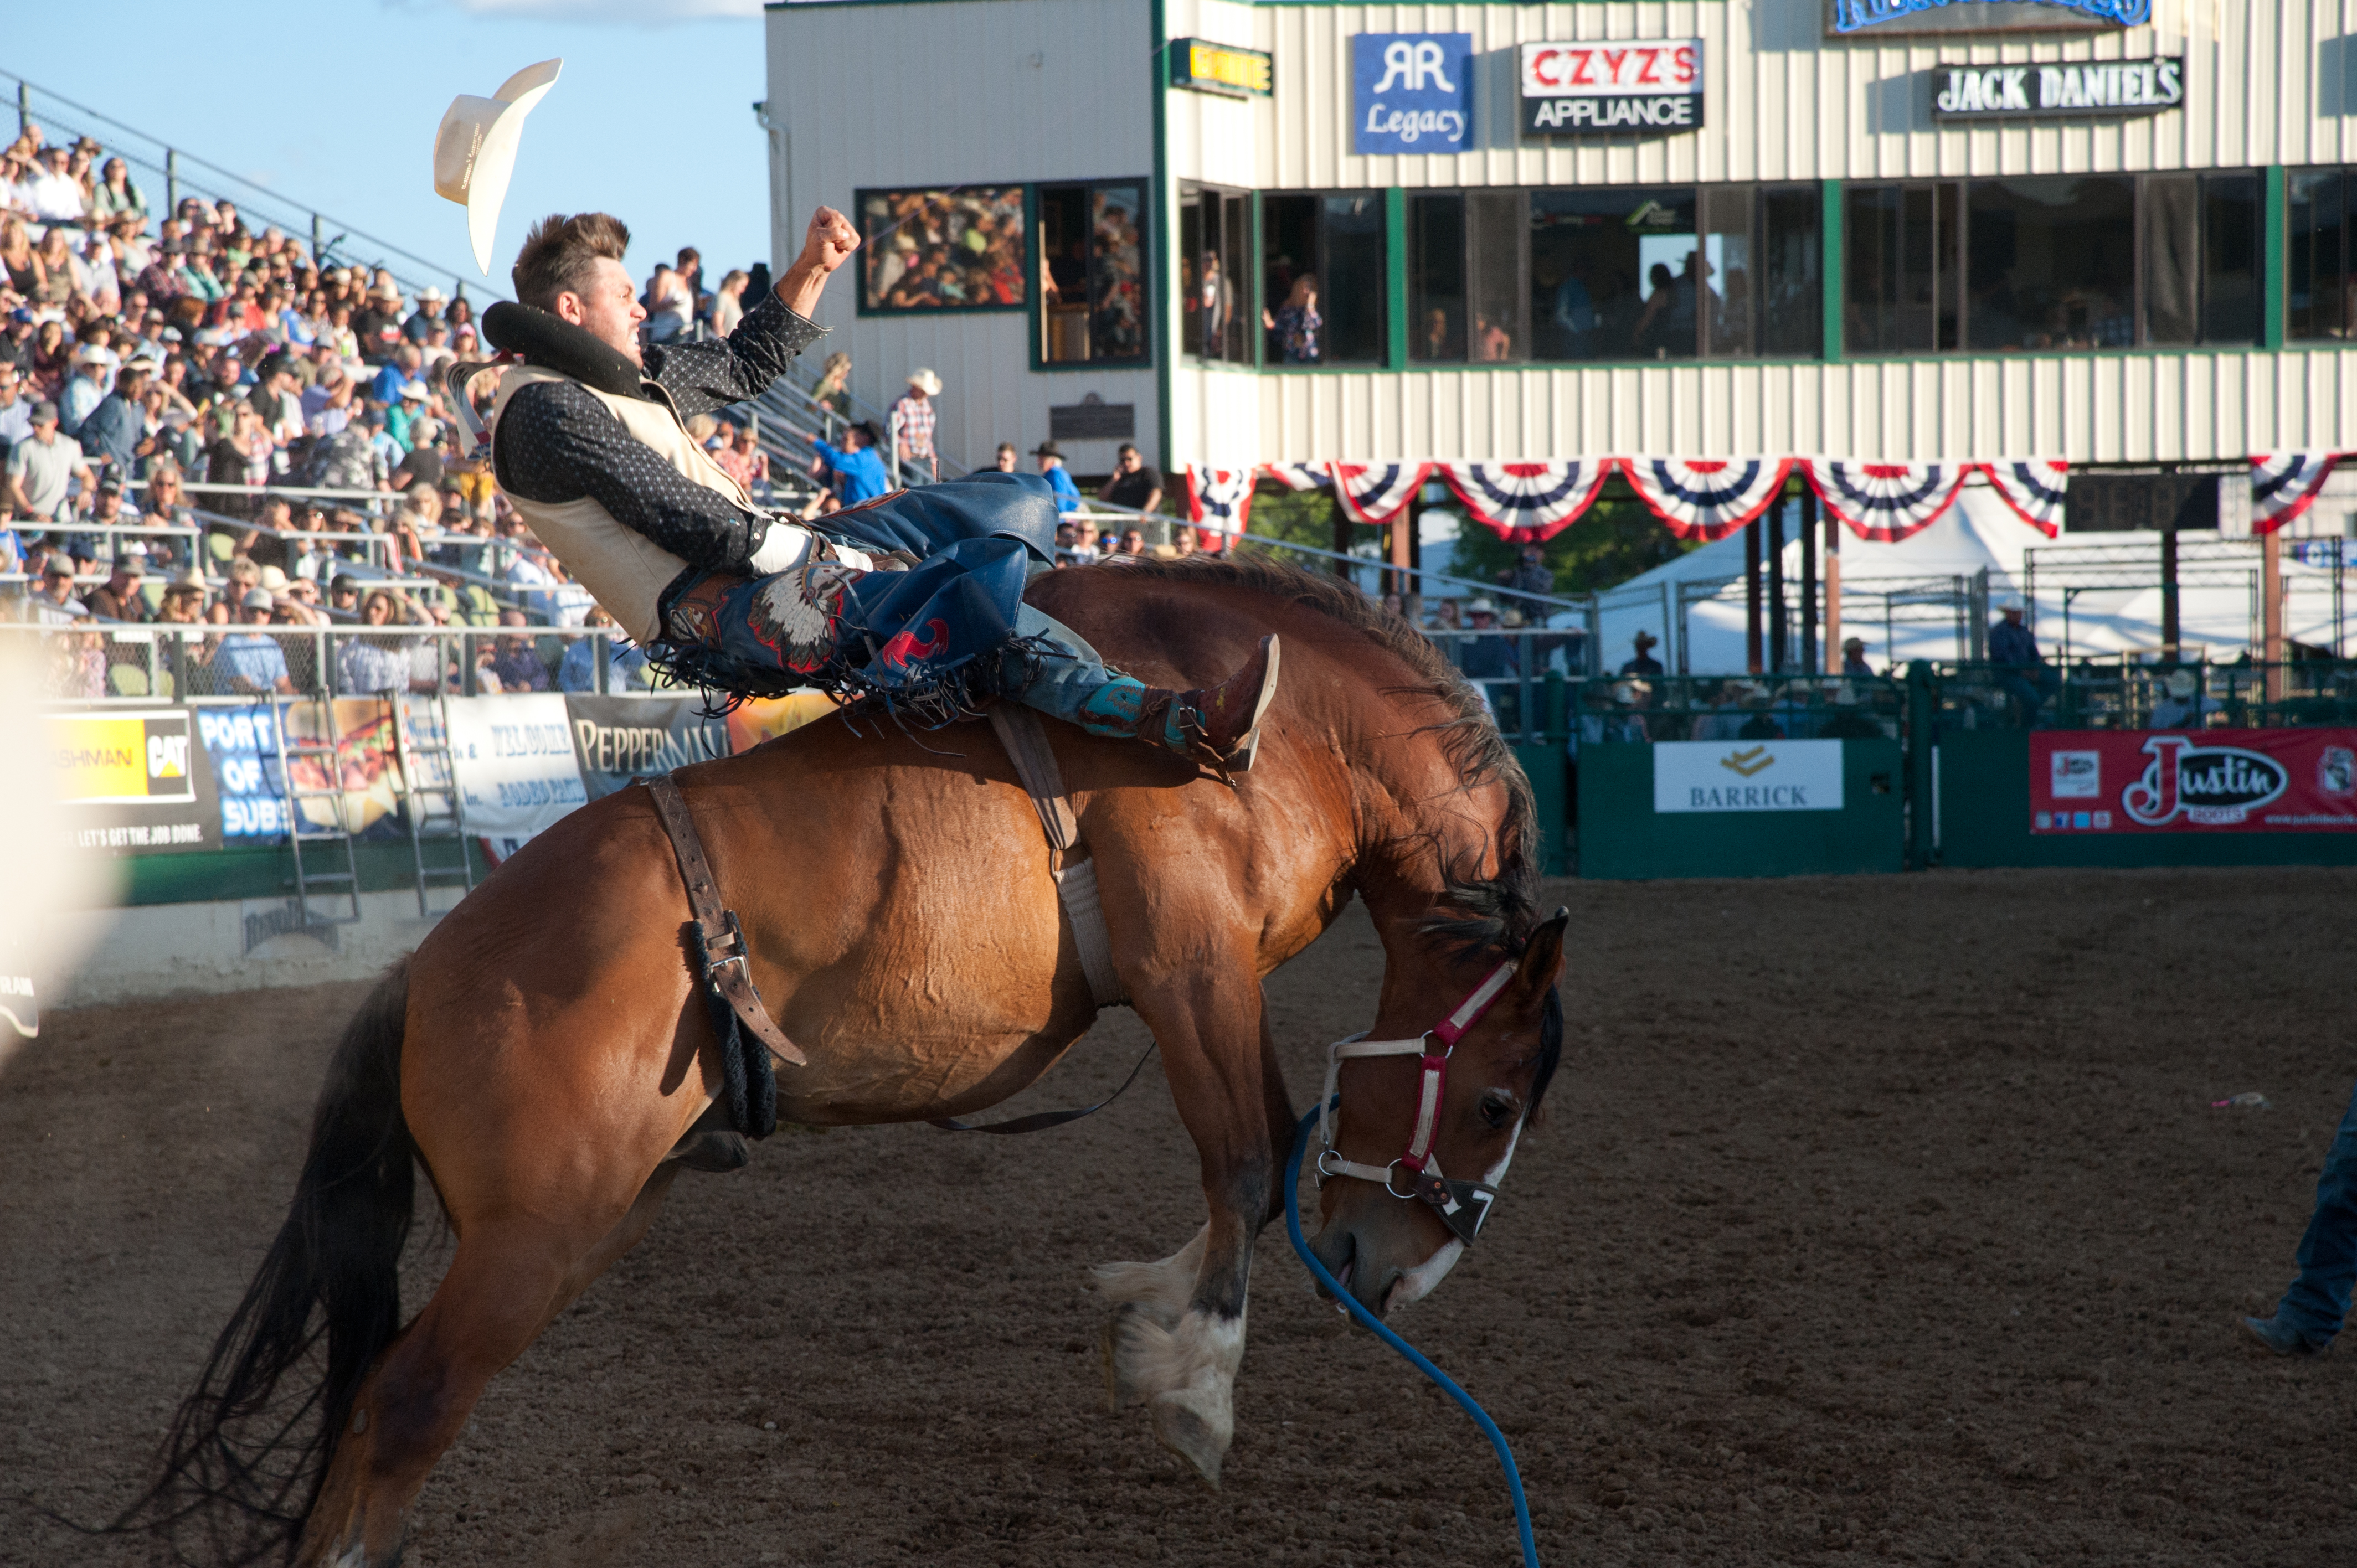 Check Out These 9 Amazing Photos Of Reno Rodeo History